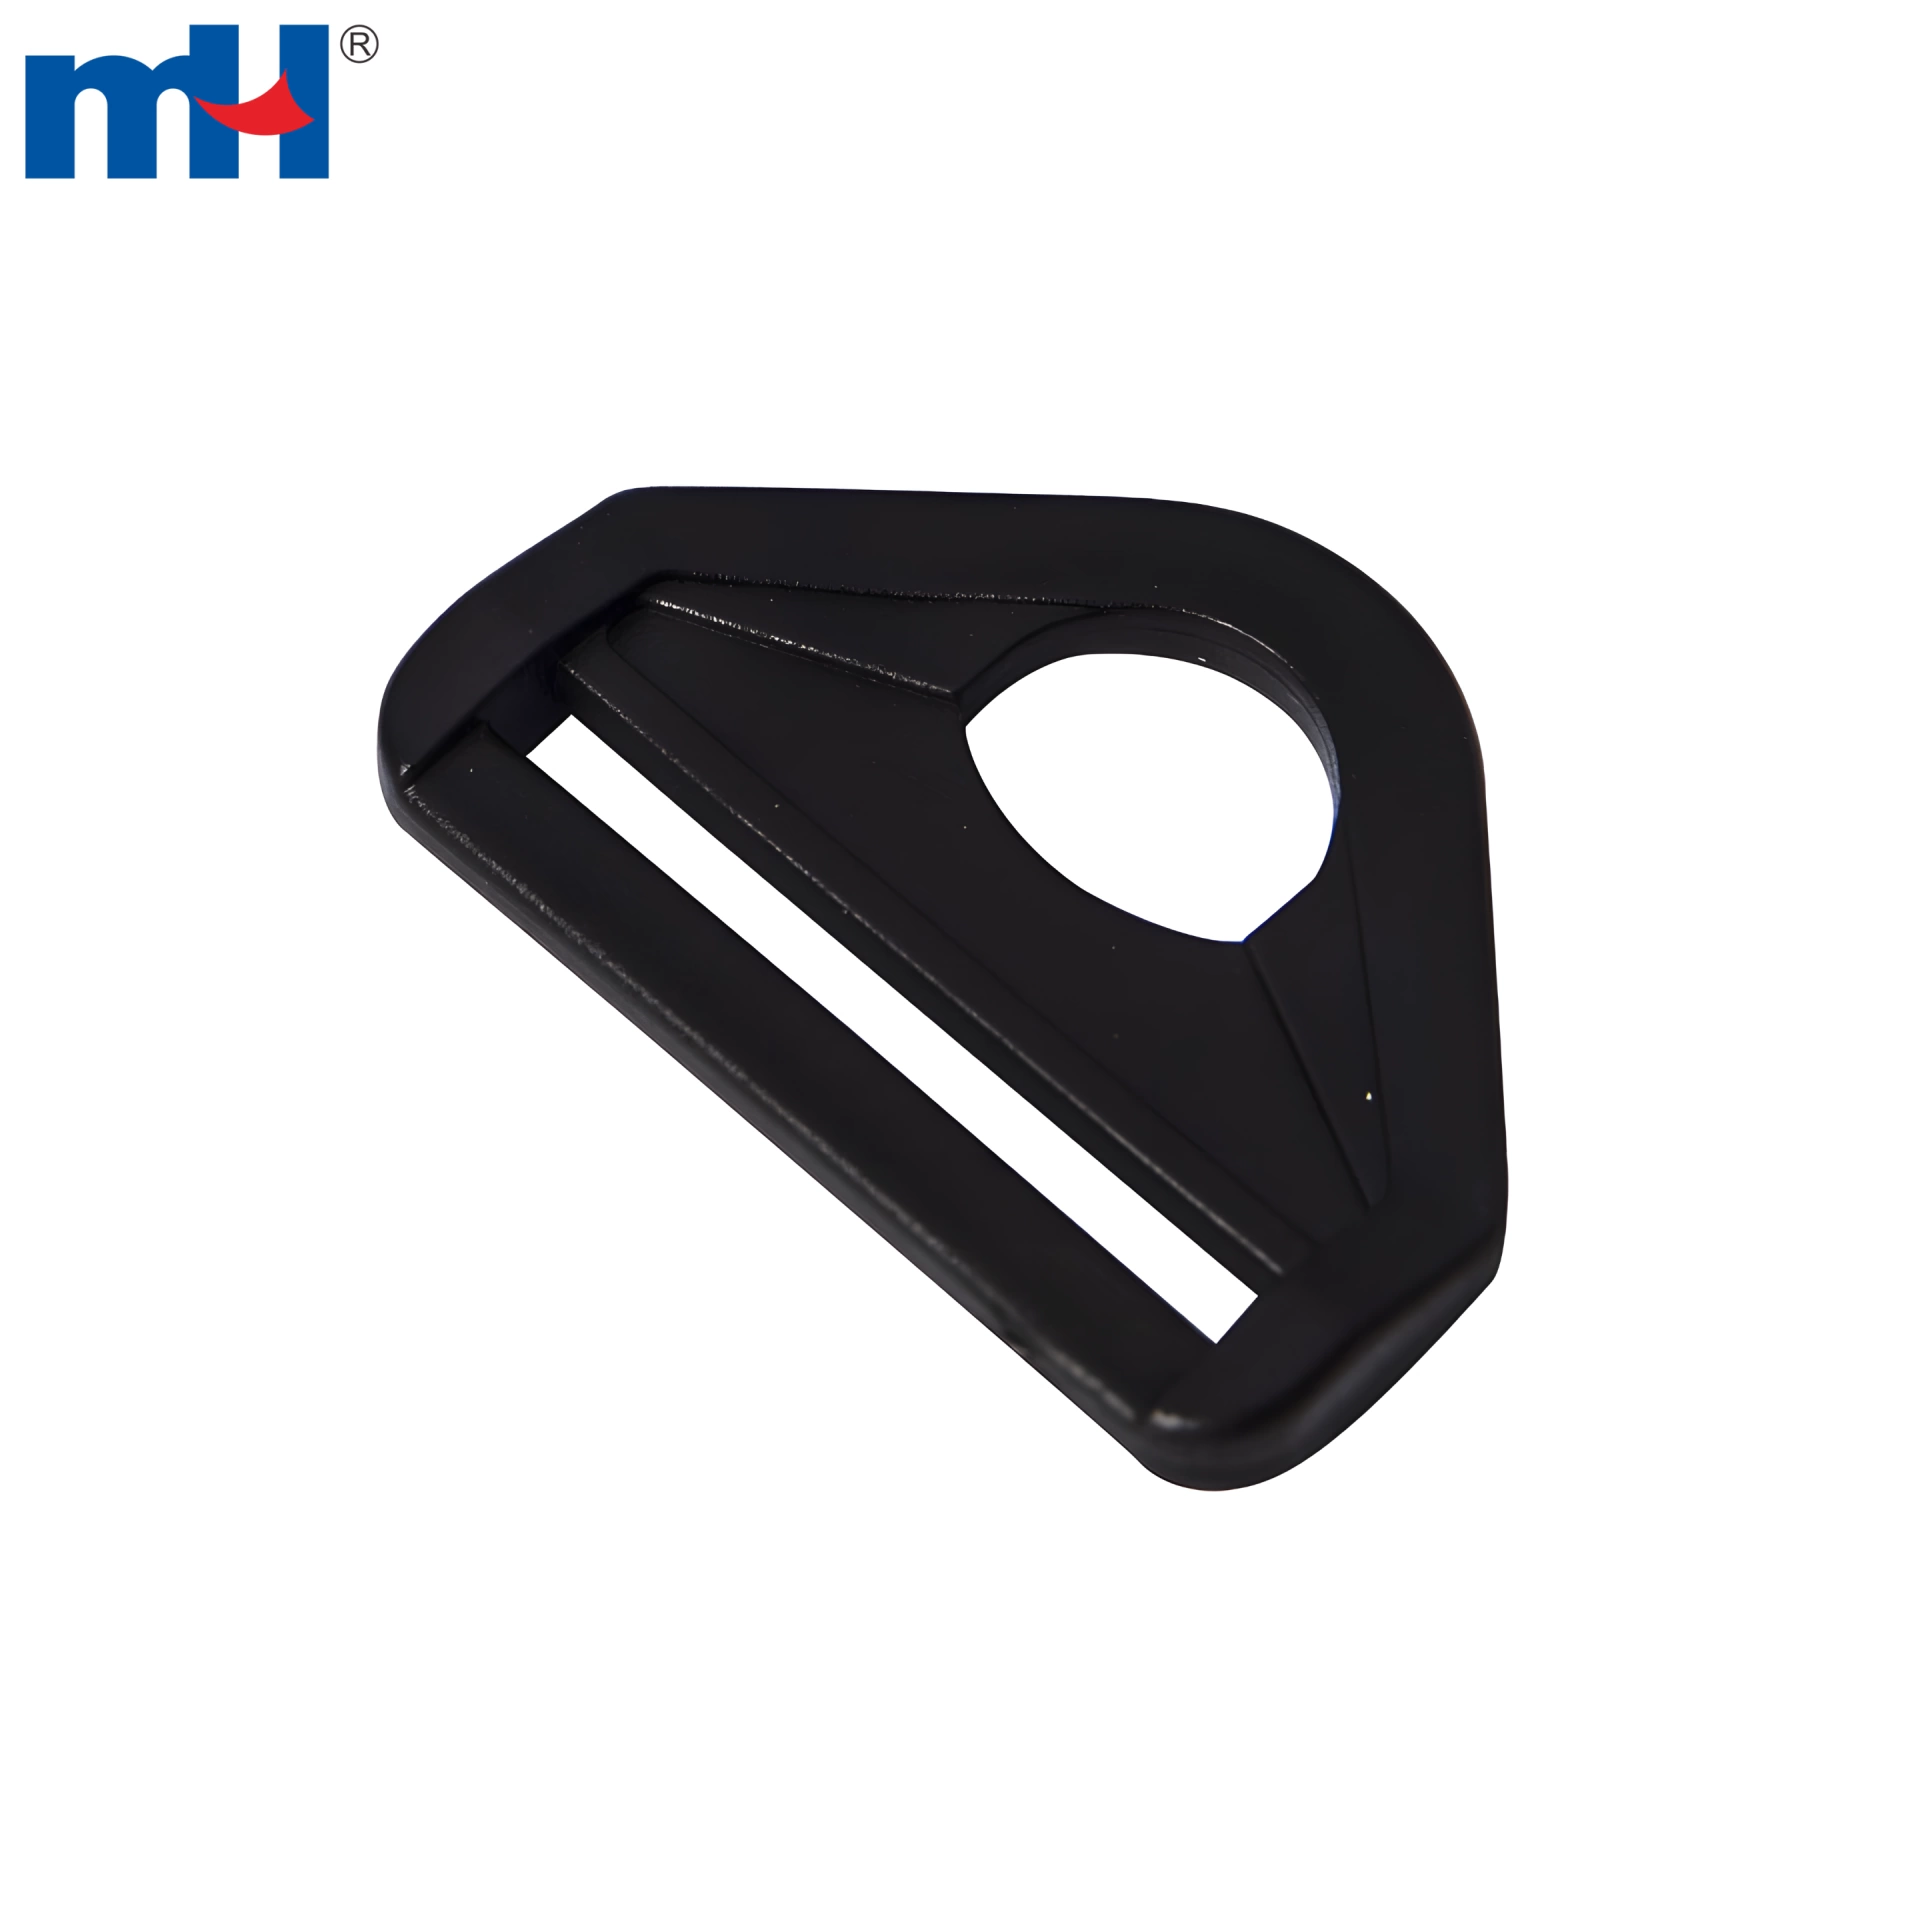 Black plastic accessories for straps of bags, backpacks